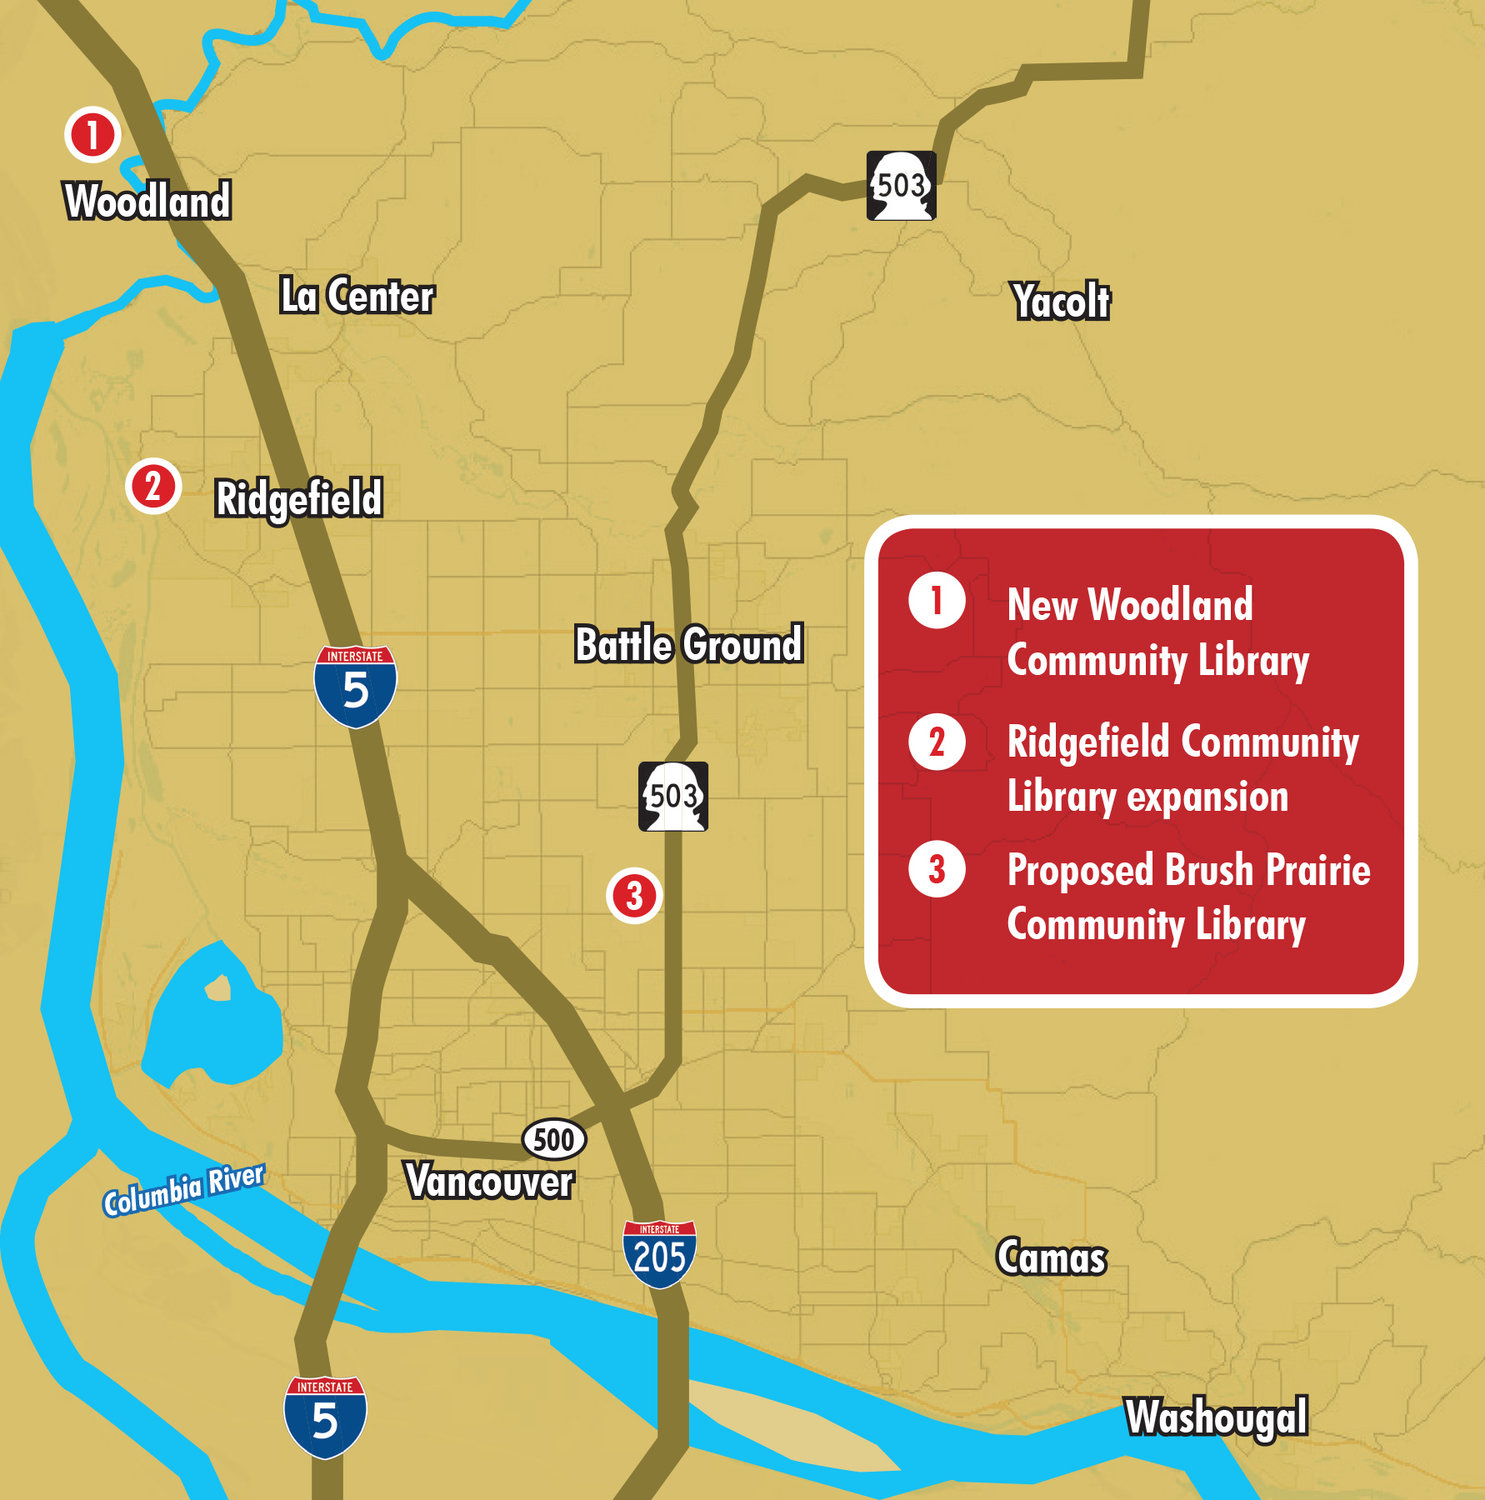 This map shows the locations of capital projects Fort Vancouver Regional Library has in various stages of development within district boundaries.